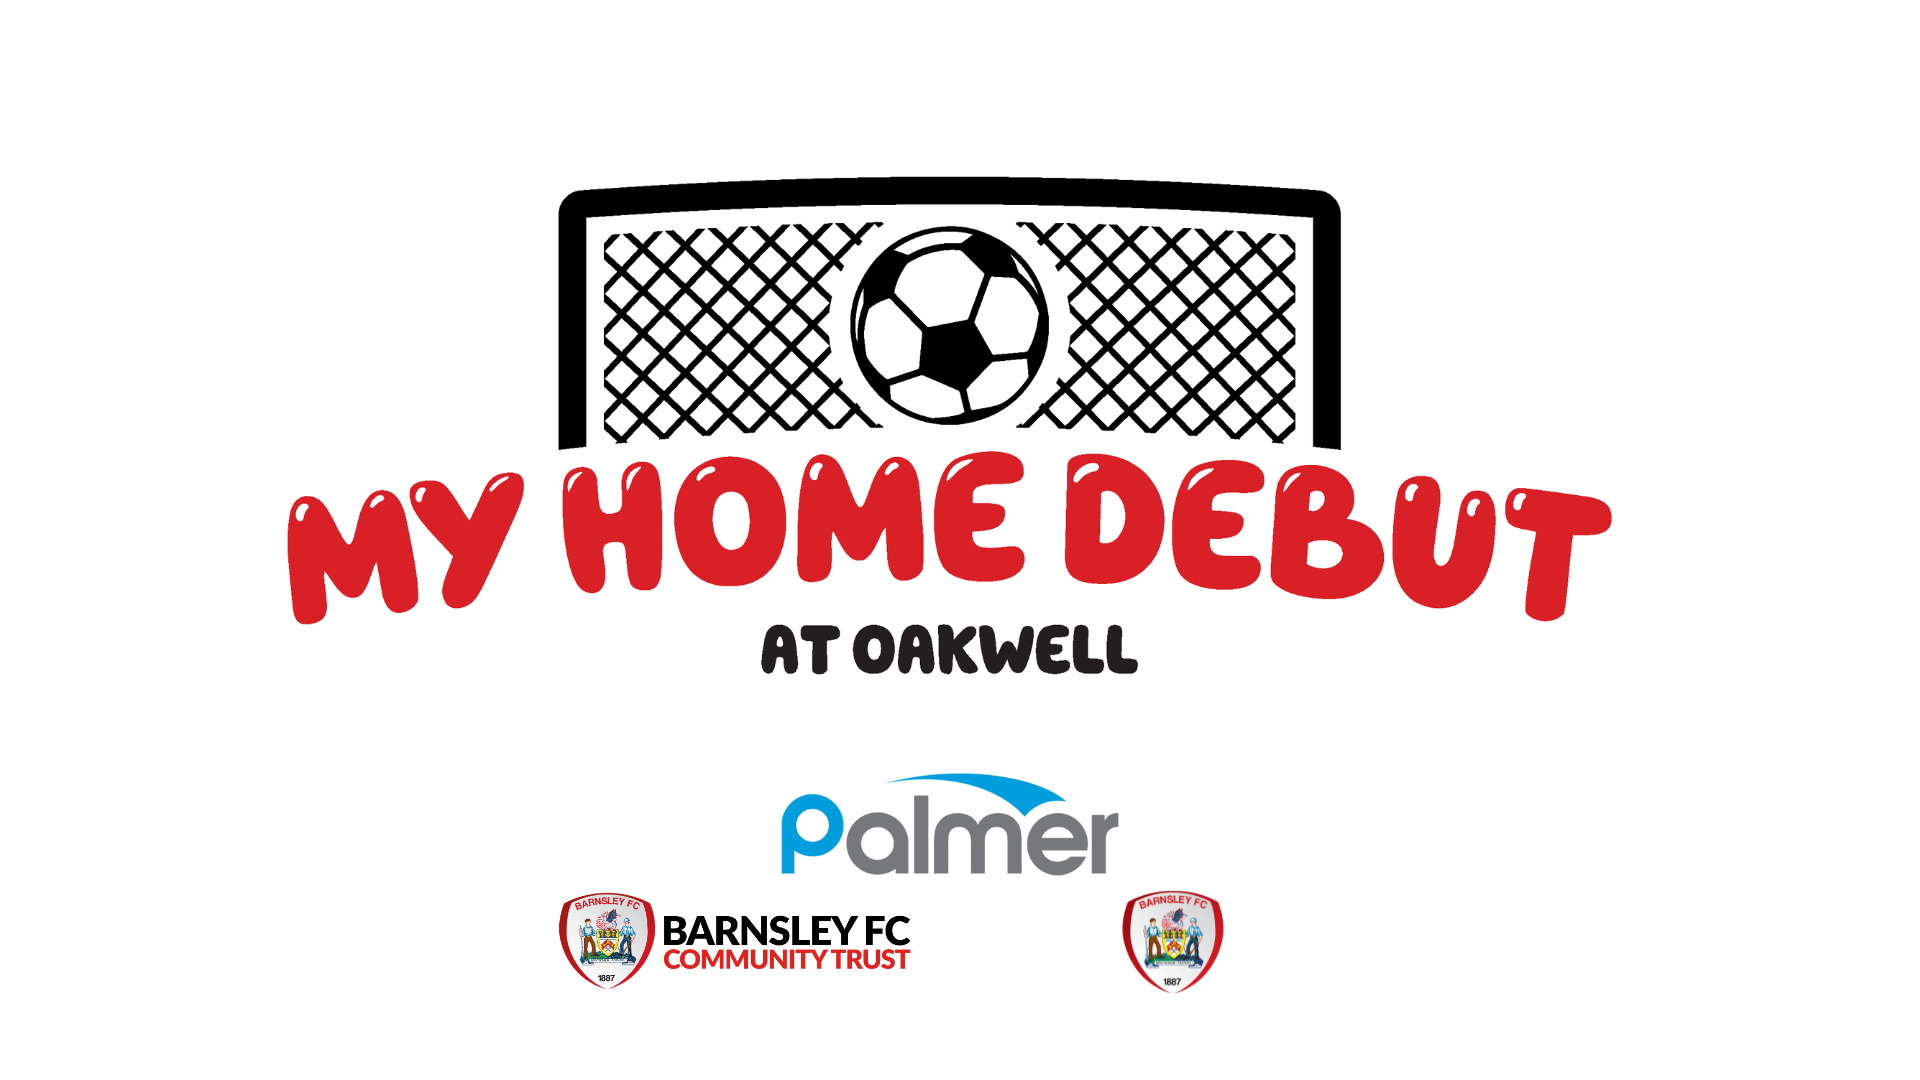 My home-debut launches this weekend in partnership with Palmer Construction and Barnsley FC.